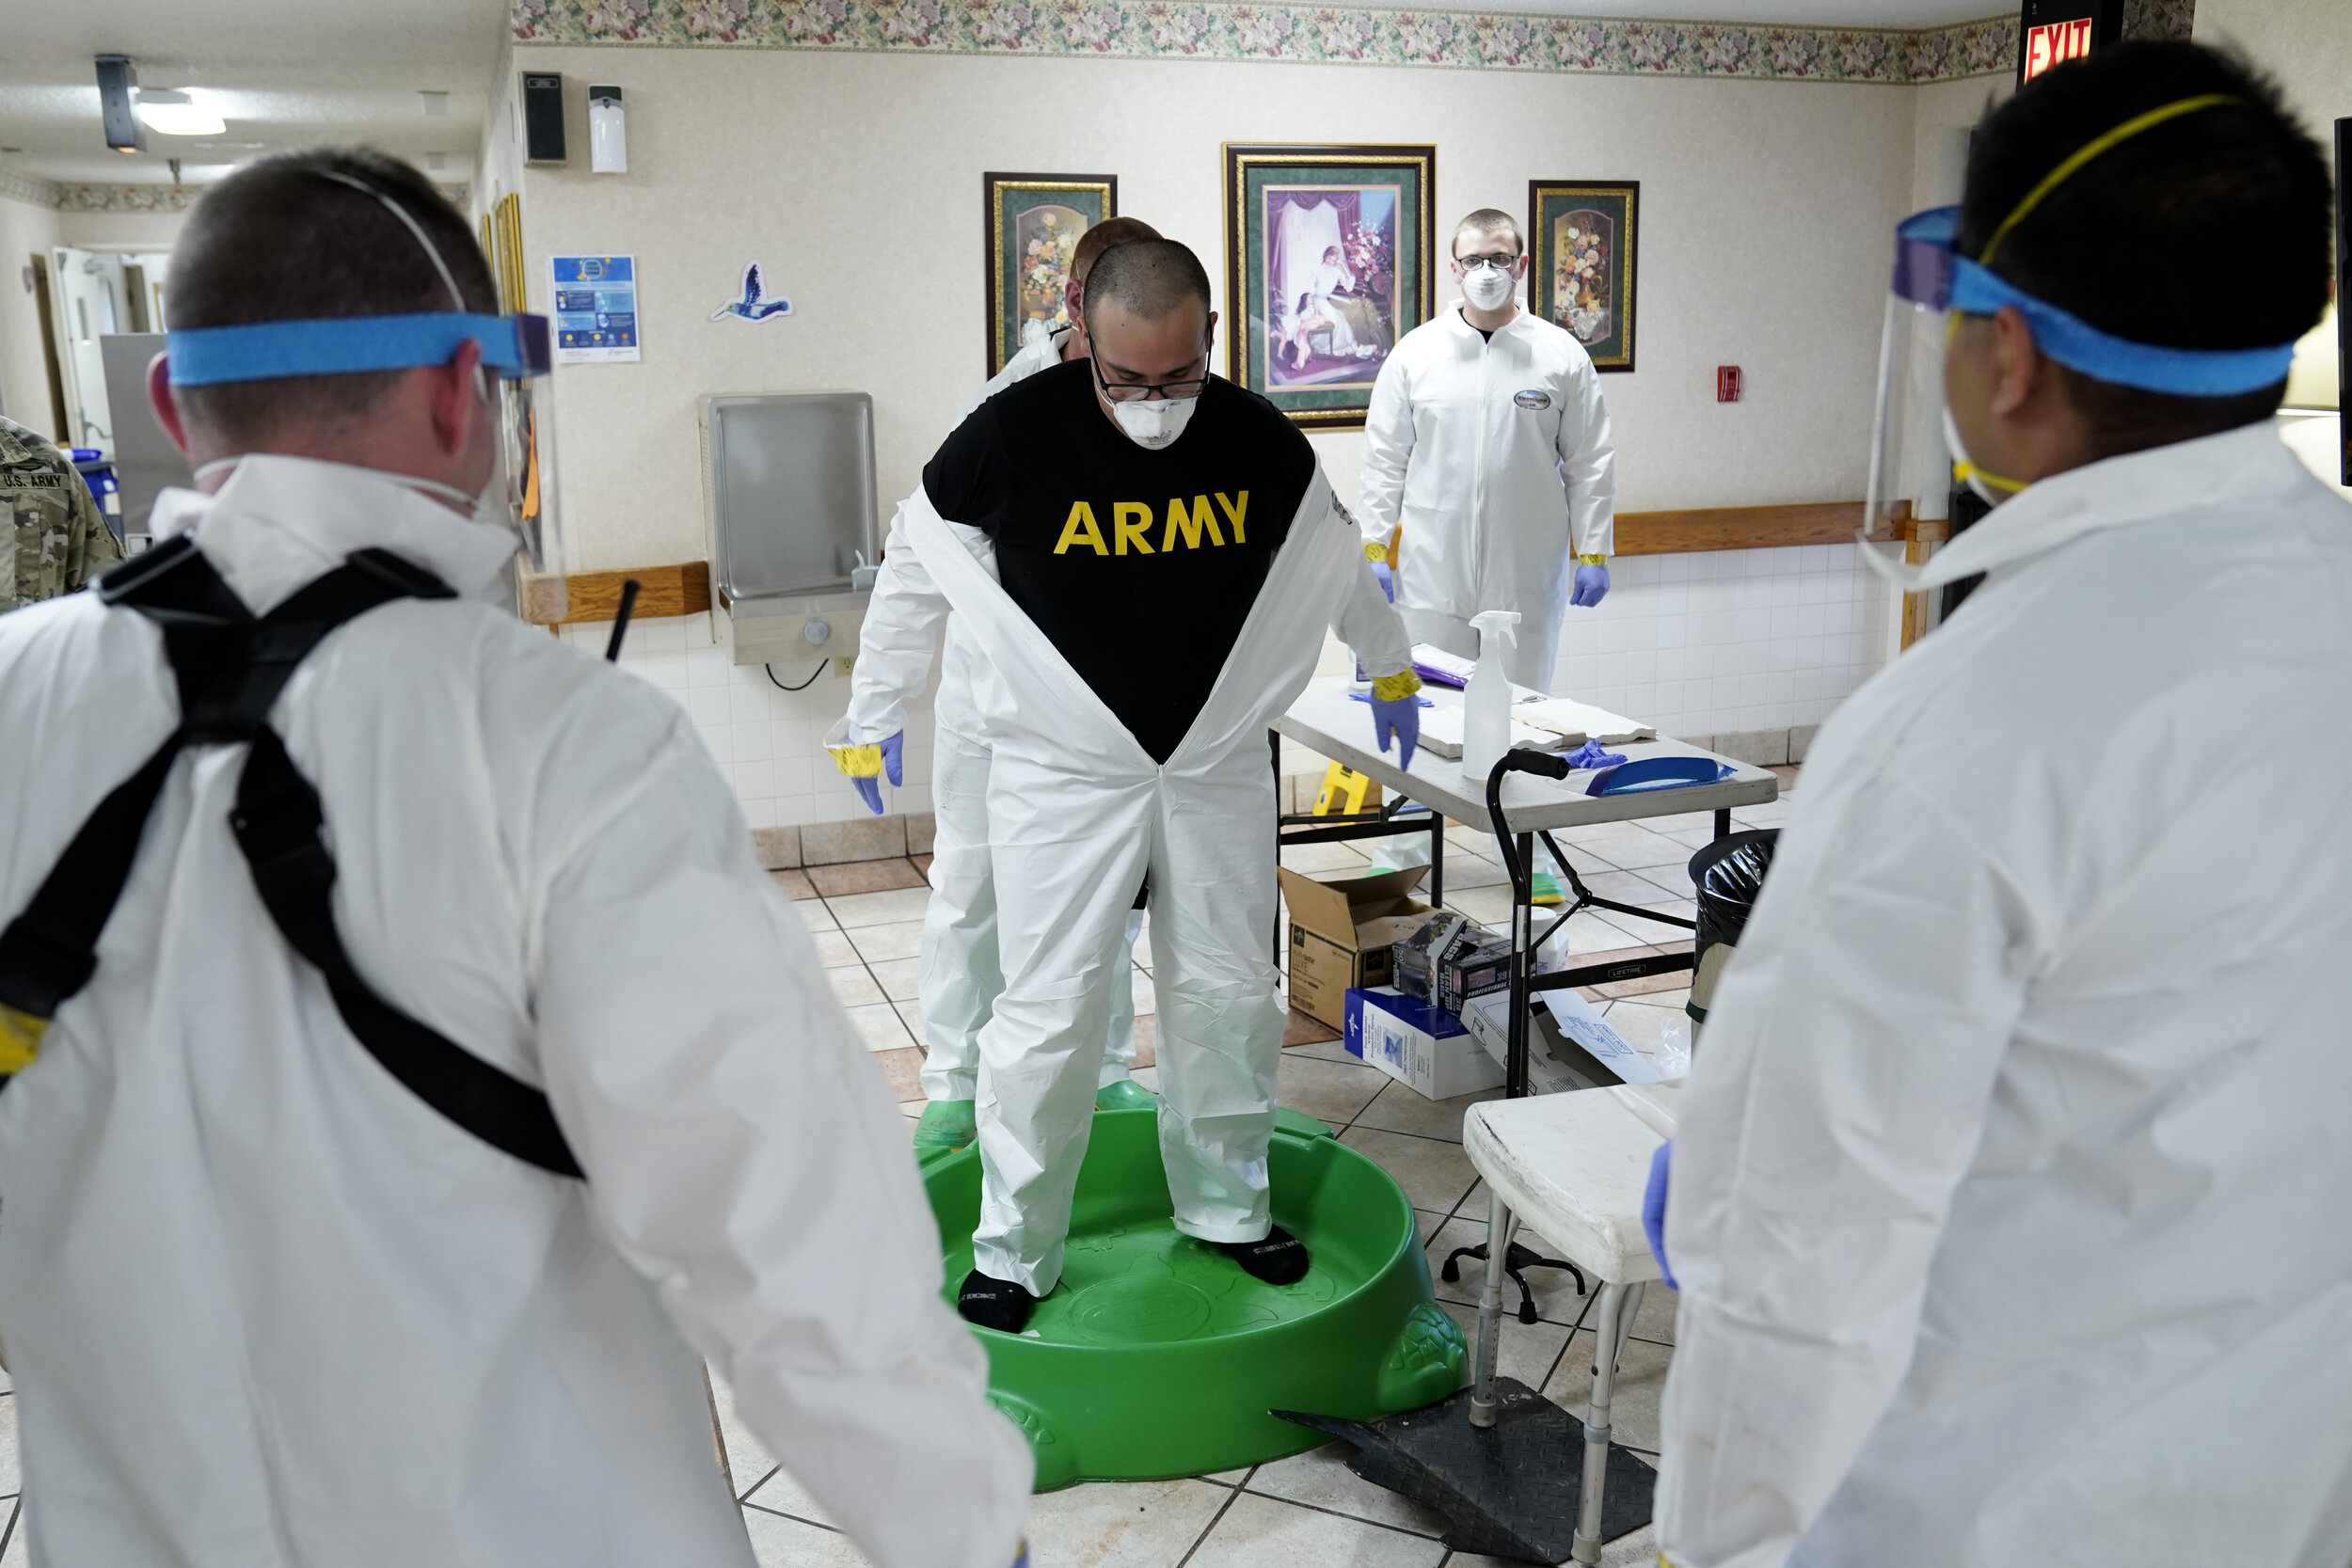  An Oklahoma National Guardsman has his PPE removed after a decontamination mission at a longterm care facility amid the spread of coronavirus disease (COVID-19) in McAlester, Oklahoma, U.S. April 22, 2020. REUTERS/Nick Oxford 